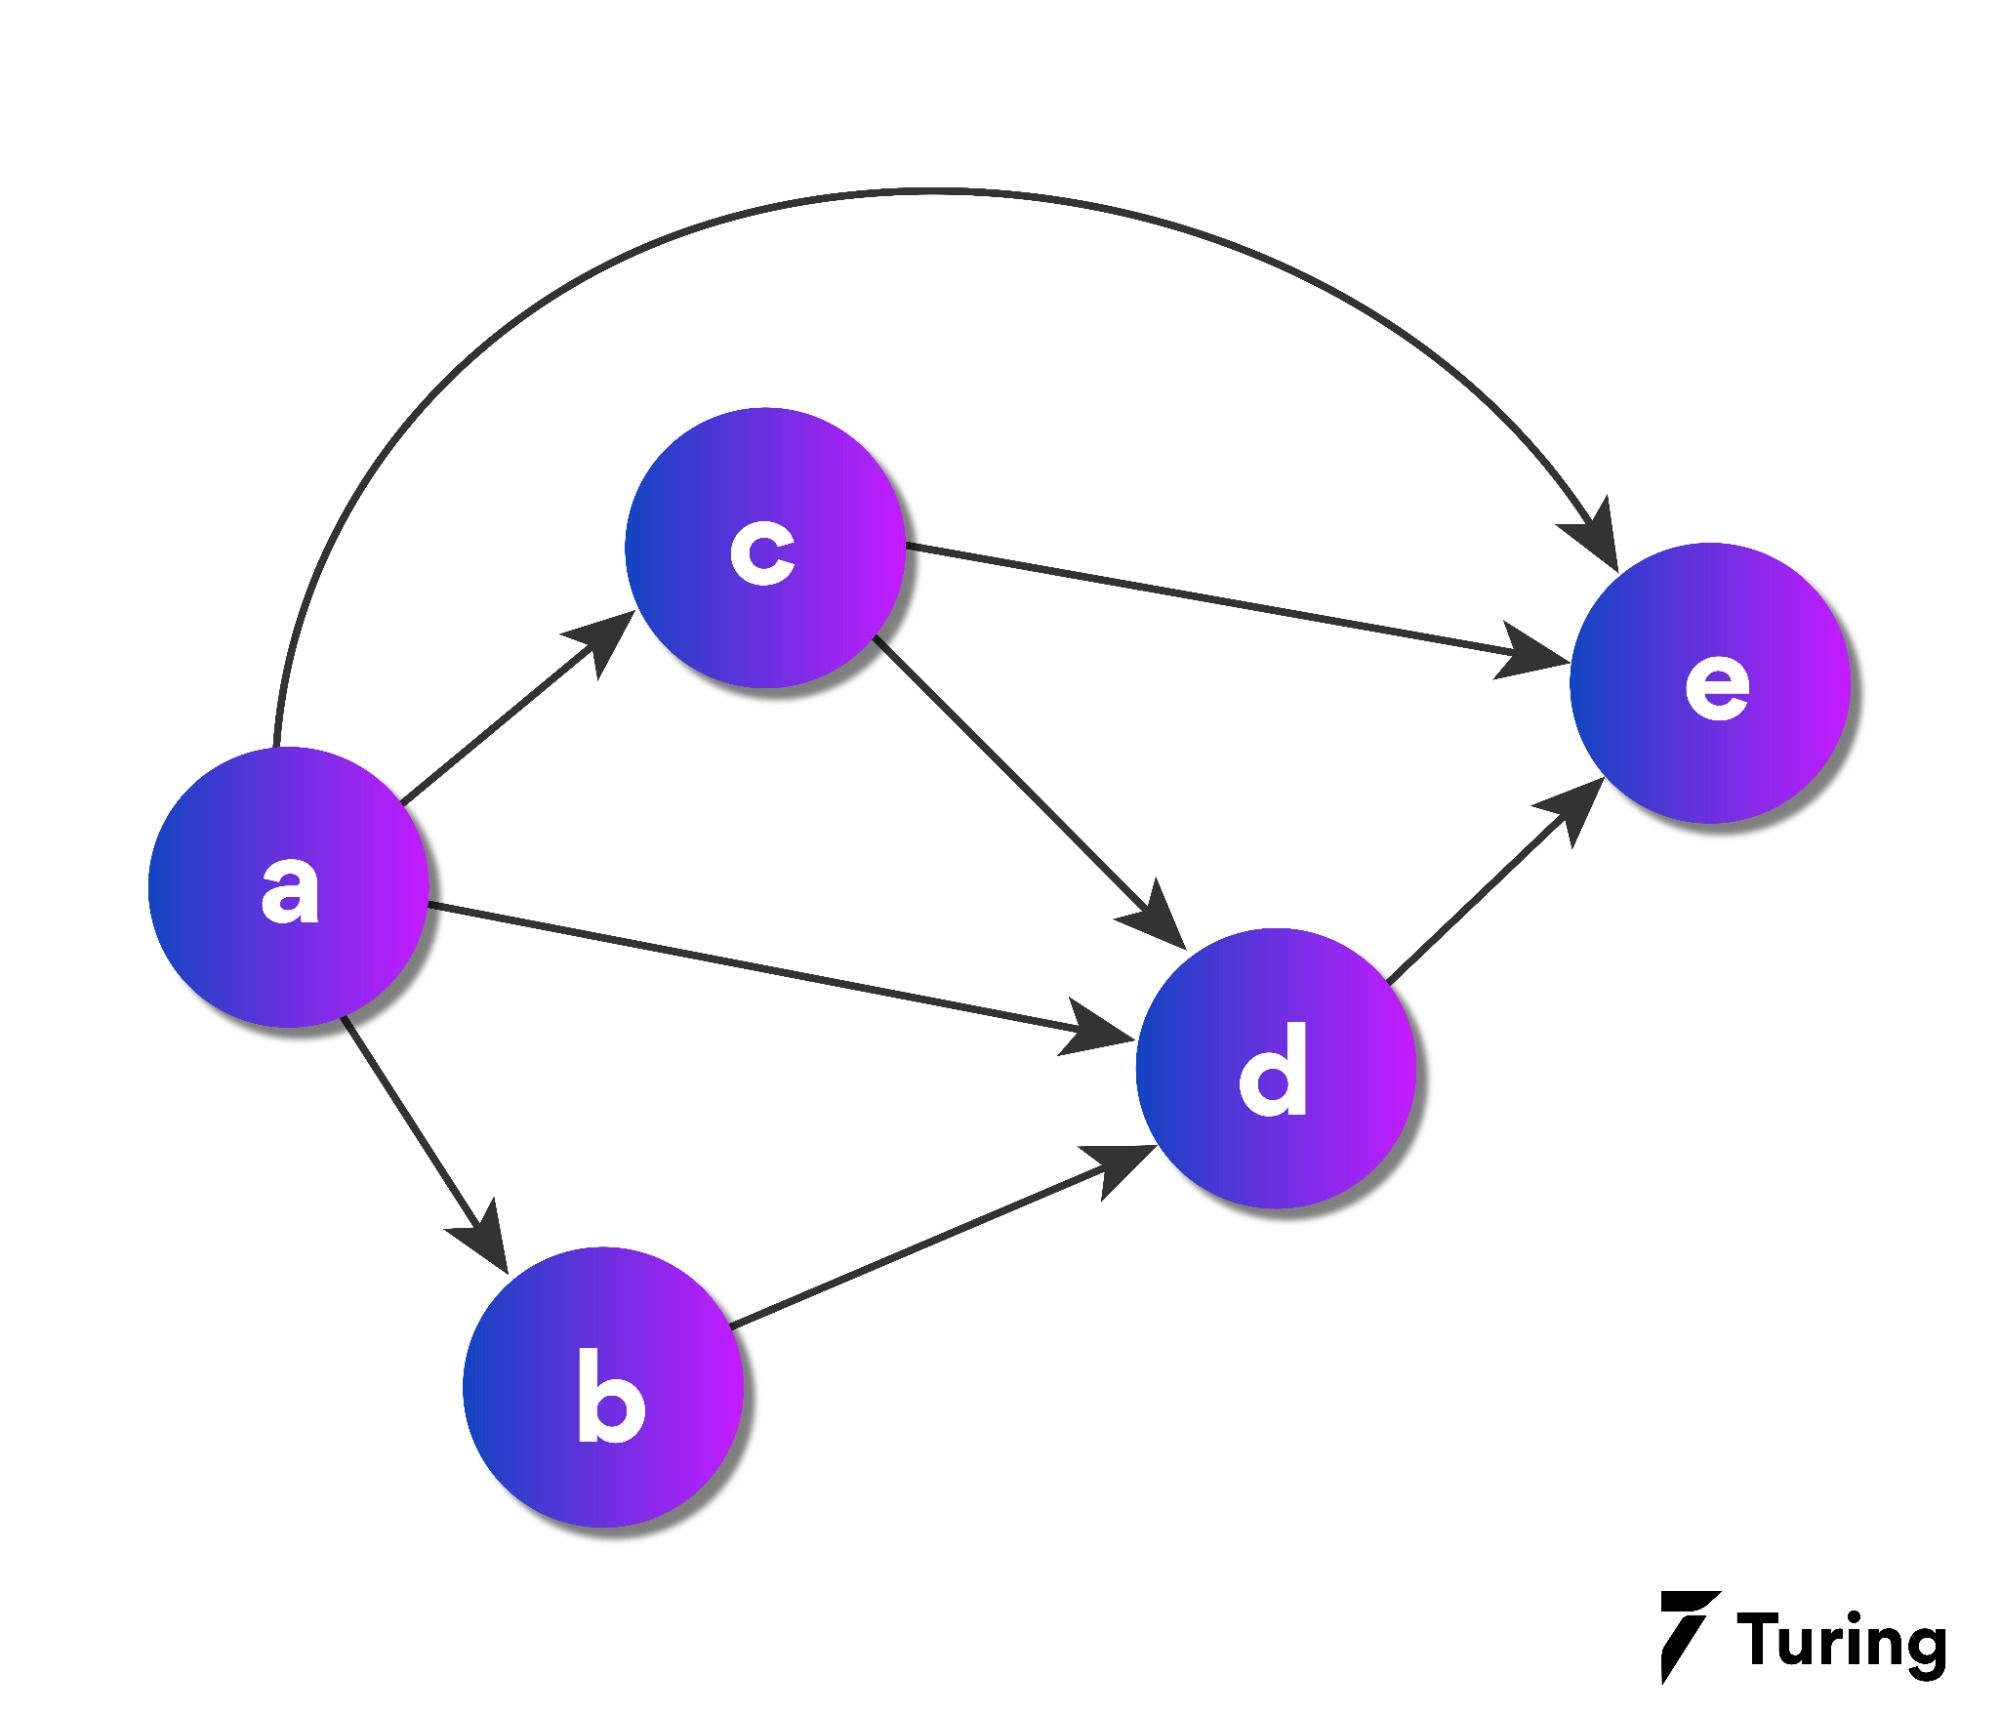 basic structure of Bayesian Networks